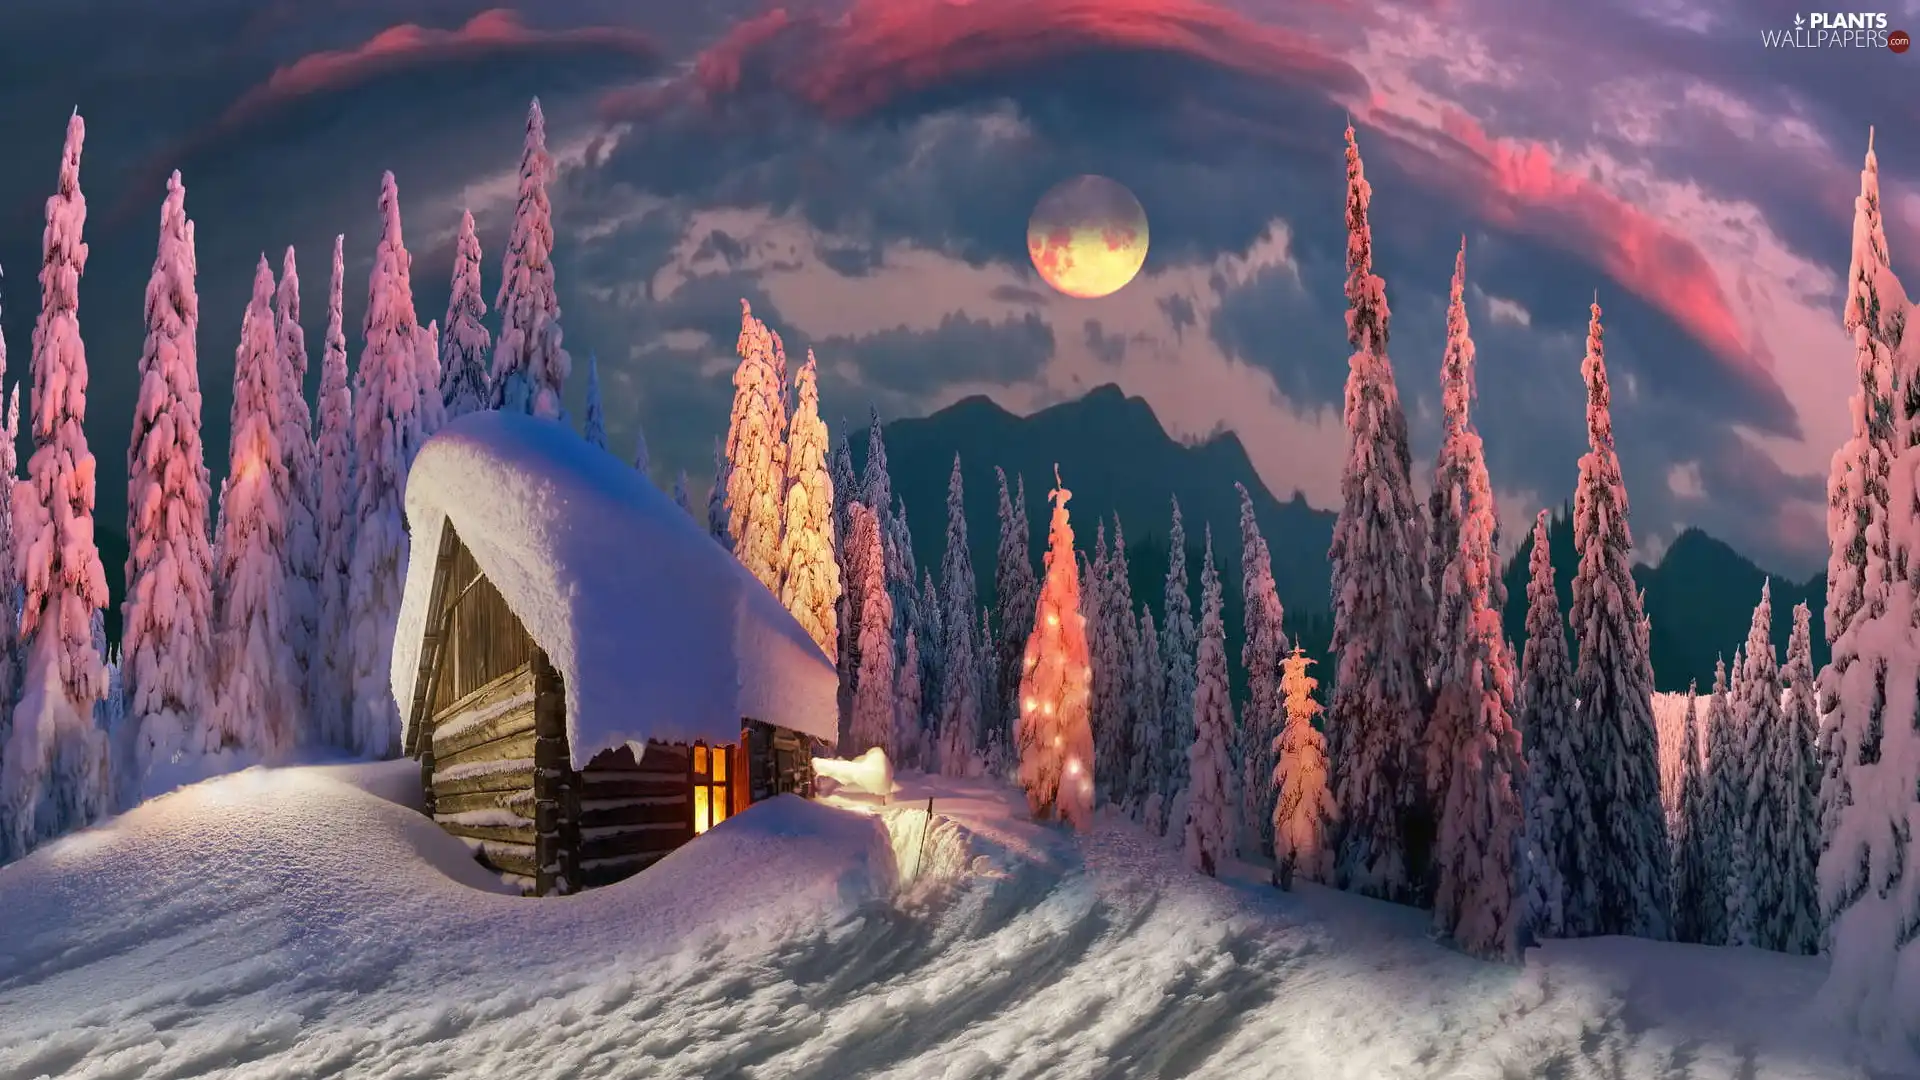 trees, photomontage, forest, viewes, house, Sky, color, winter, Digital Art, moon, snowy